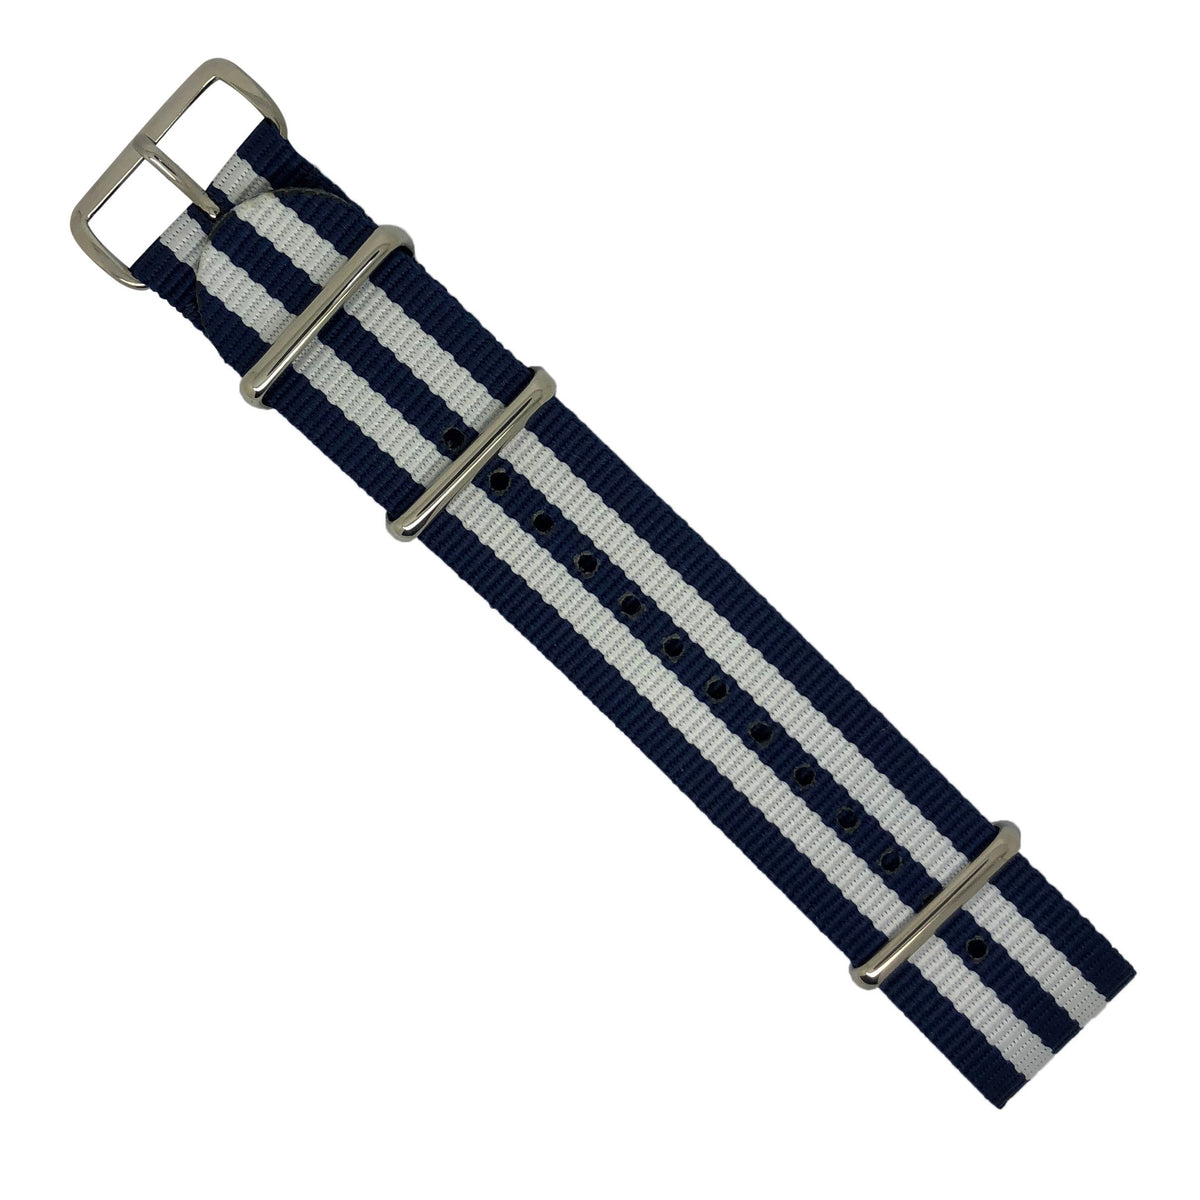 Premium Nato Strap in Navy White Small Stripes with Polished Silver Buckle (22mm) - Nomad Watch Works Malaysia